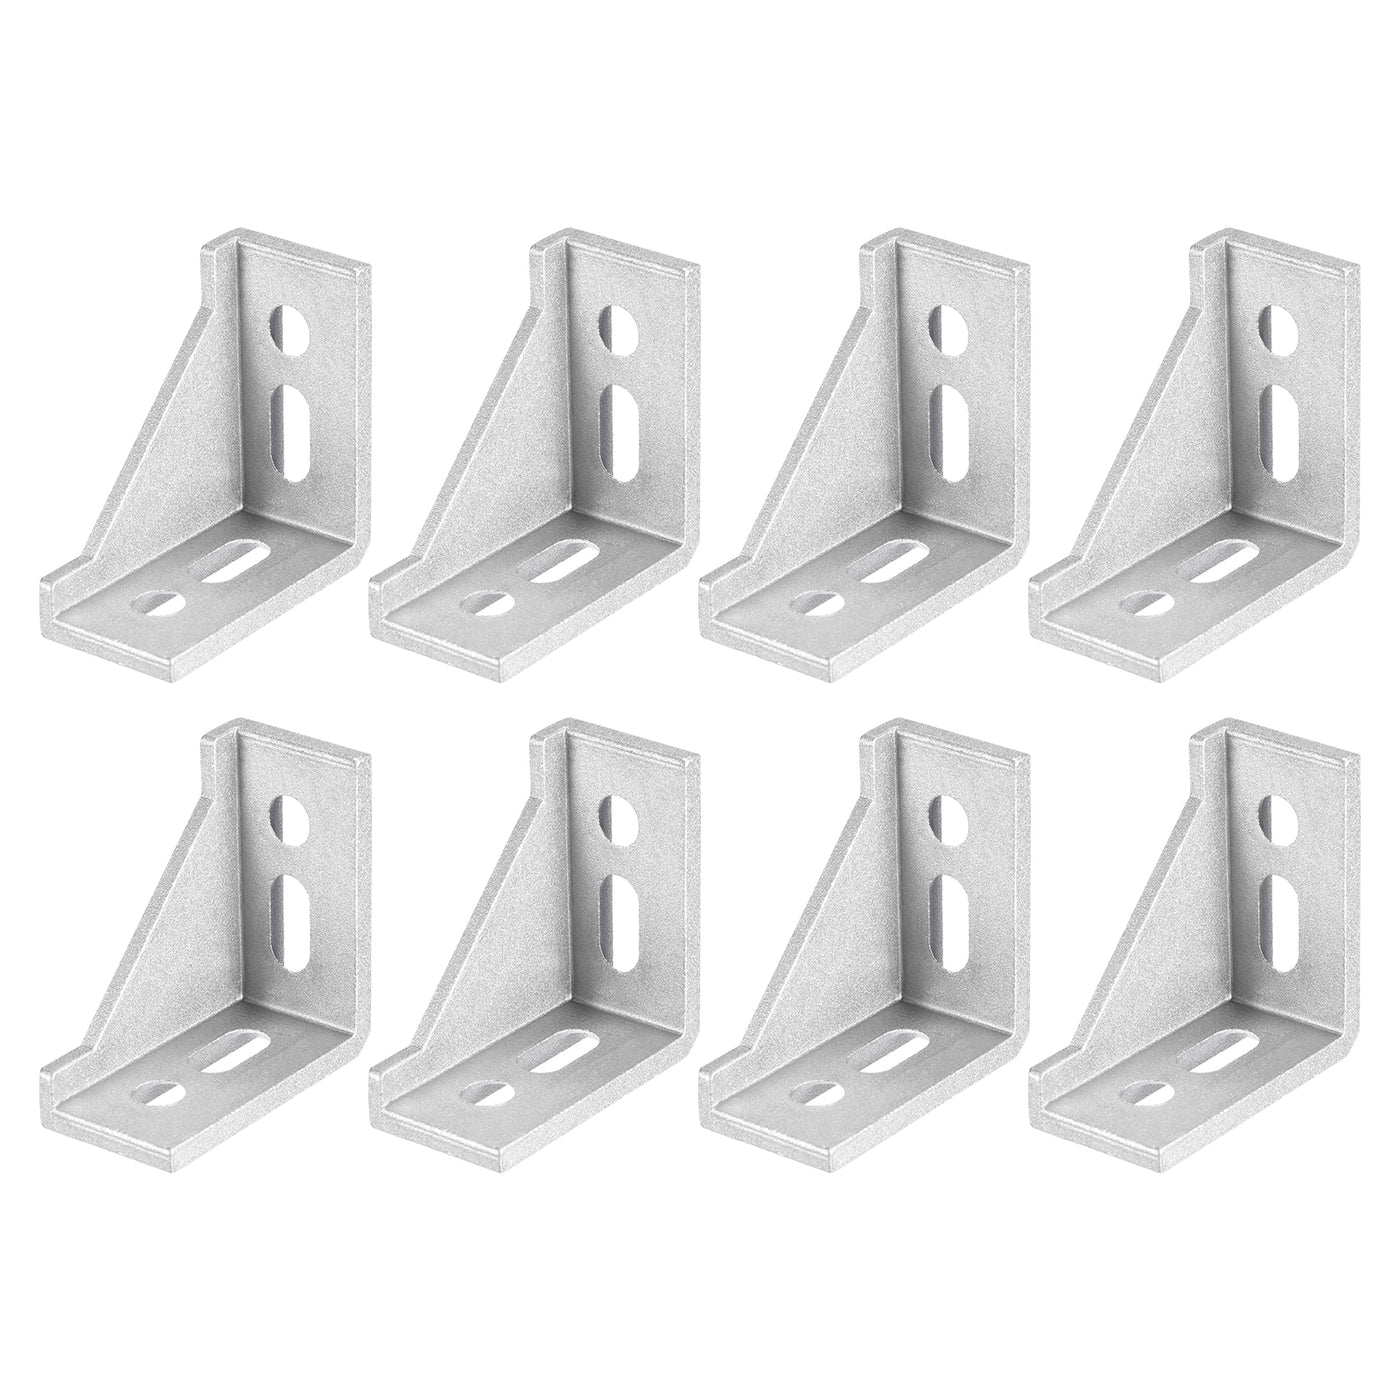 uxcell Uxcell 8Pcs Inside Corner Bracket Gusset, 58x58x29mm 3060 Angle Connectors for 3030/3060 Series Aluminum Extrusion Profile Silver